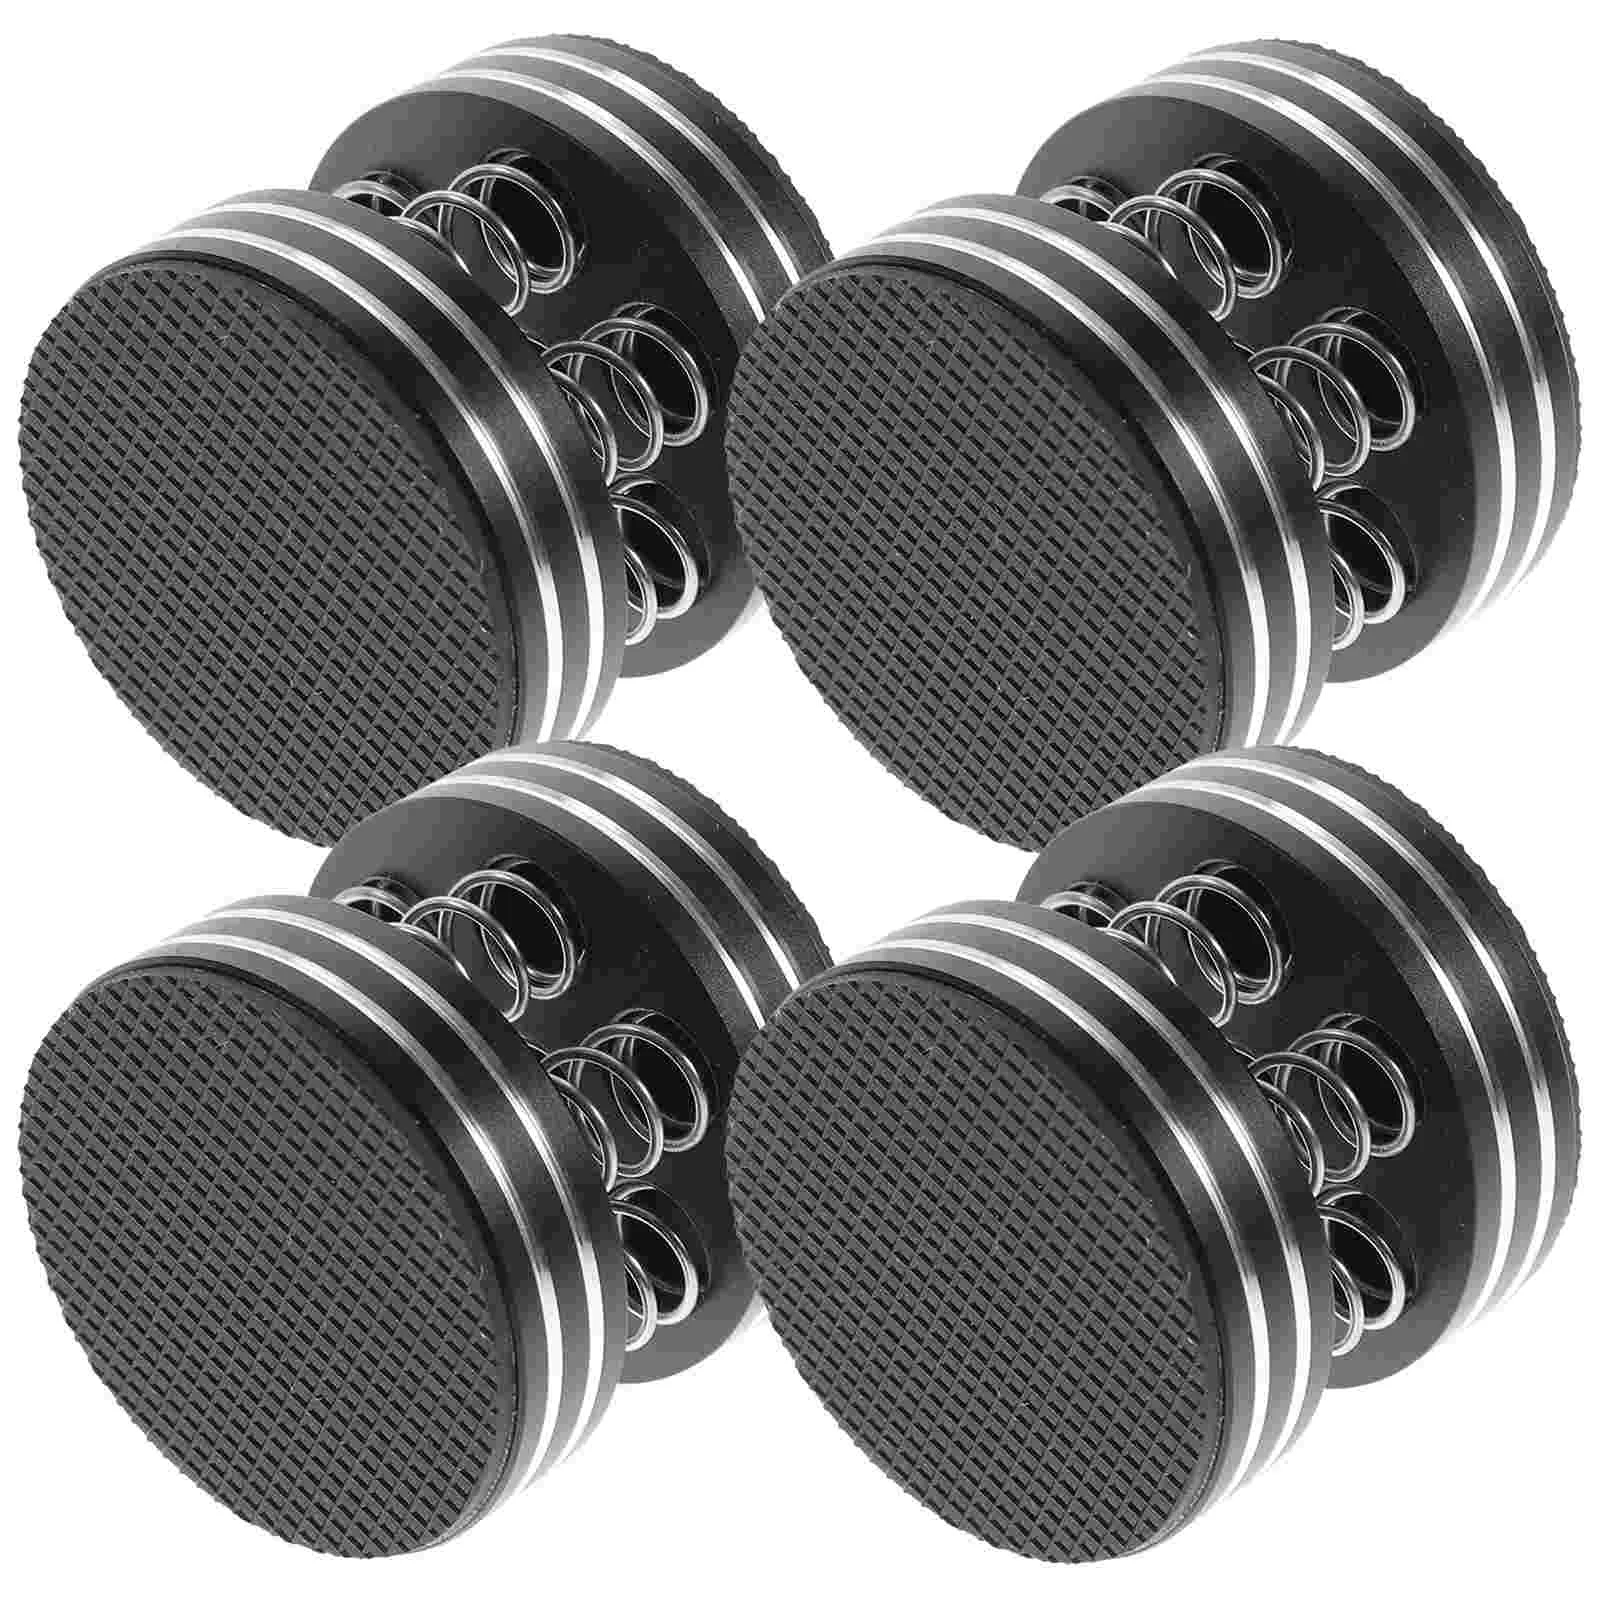 

4pcs Practical Replacement Anti-skid Spring Speaker Stand Speaker Vibration Absorber Isolation Feet For Speakers